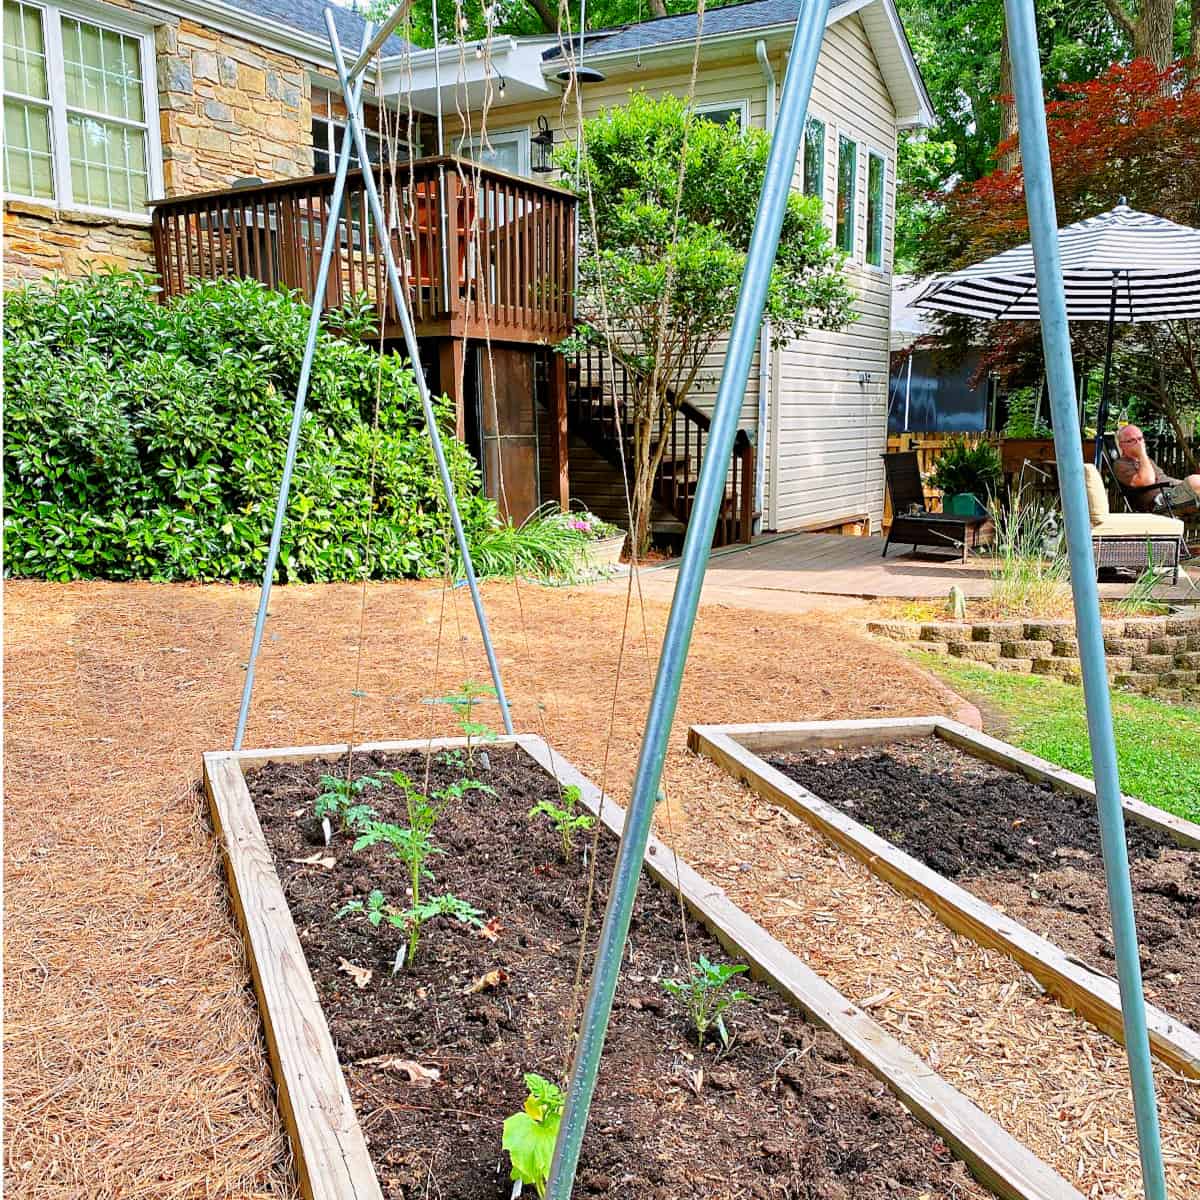 tomato trellis set up in a small raised bed garden